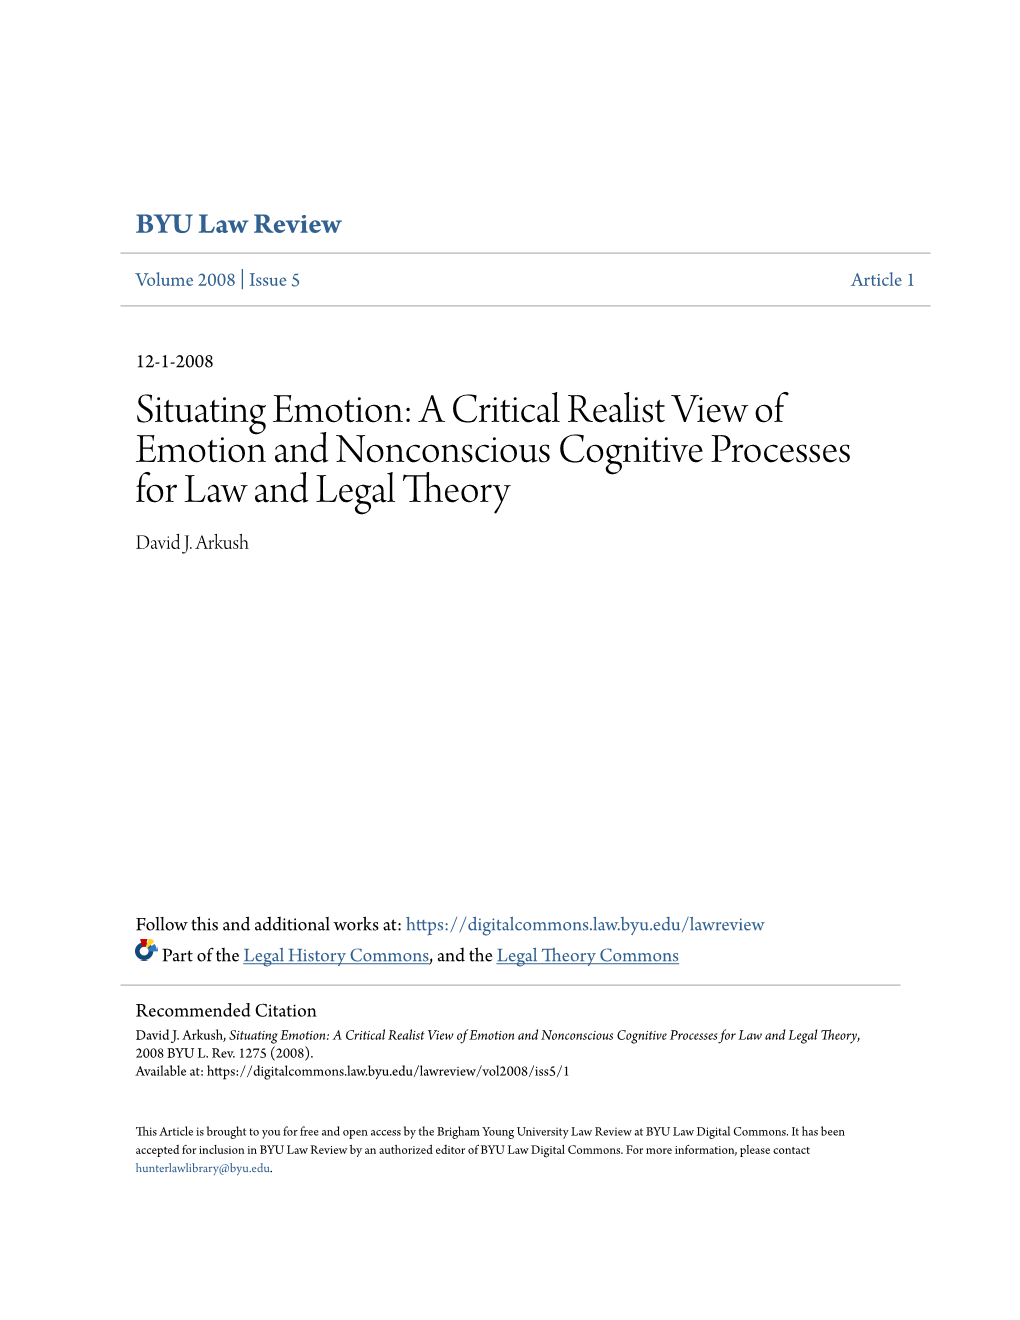 Situating Emotion: a Critical Realist View of Emotion and Nonconscious Cognitive Processes for Law and Legal Theory David J